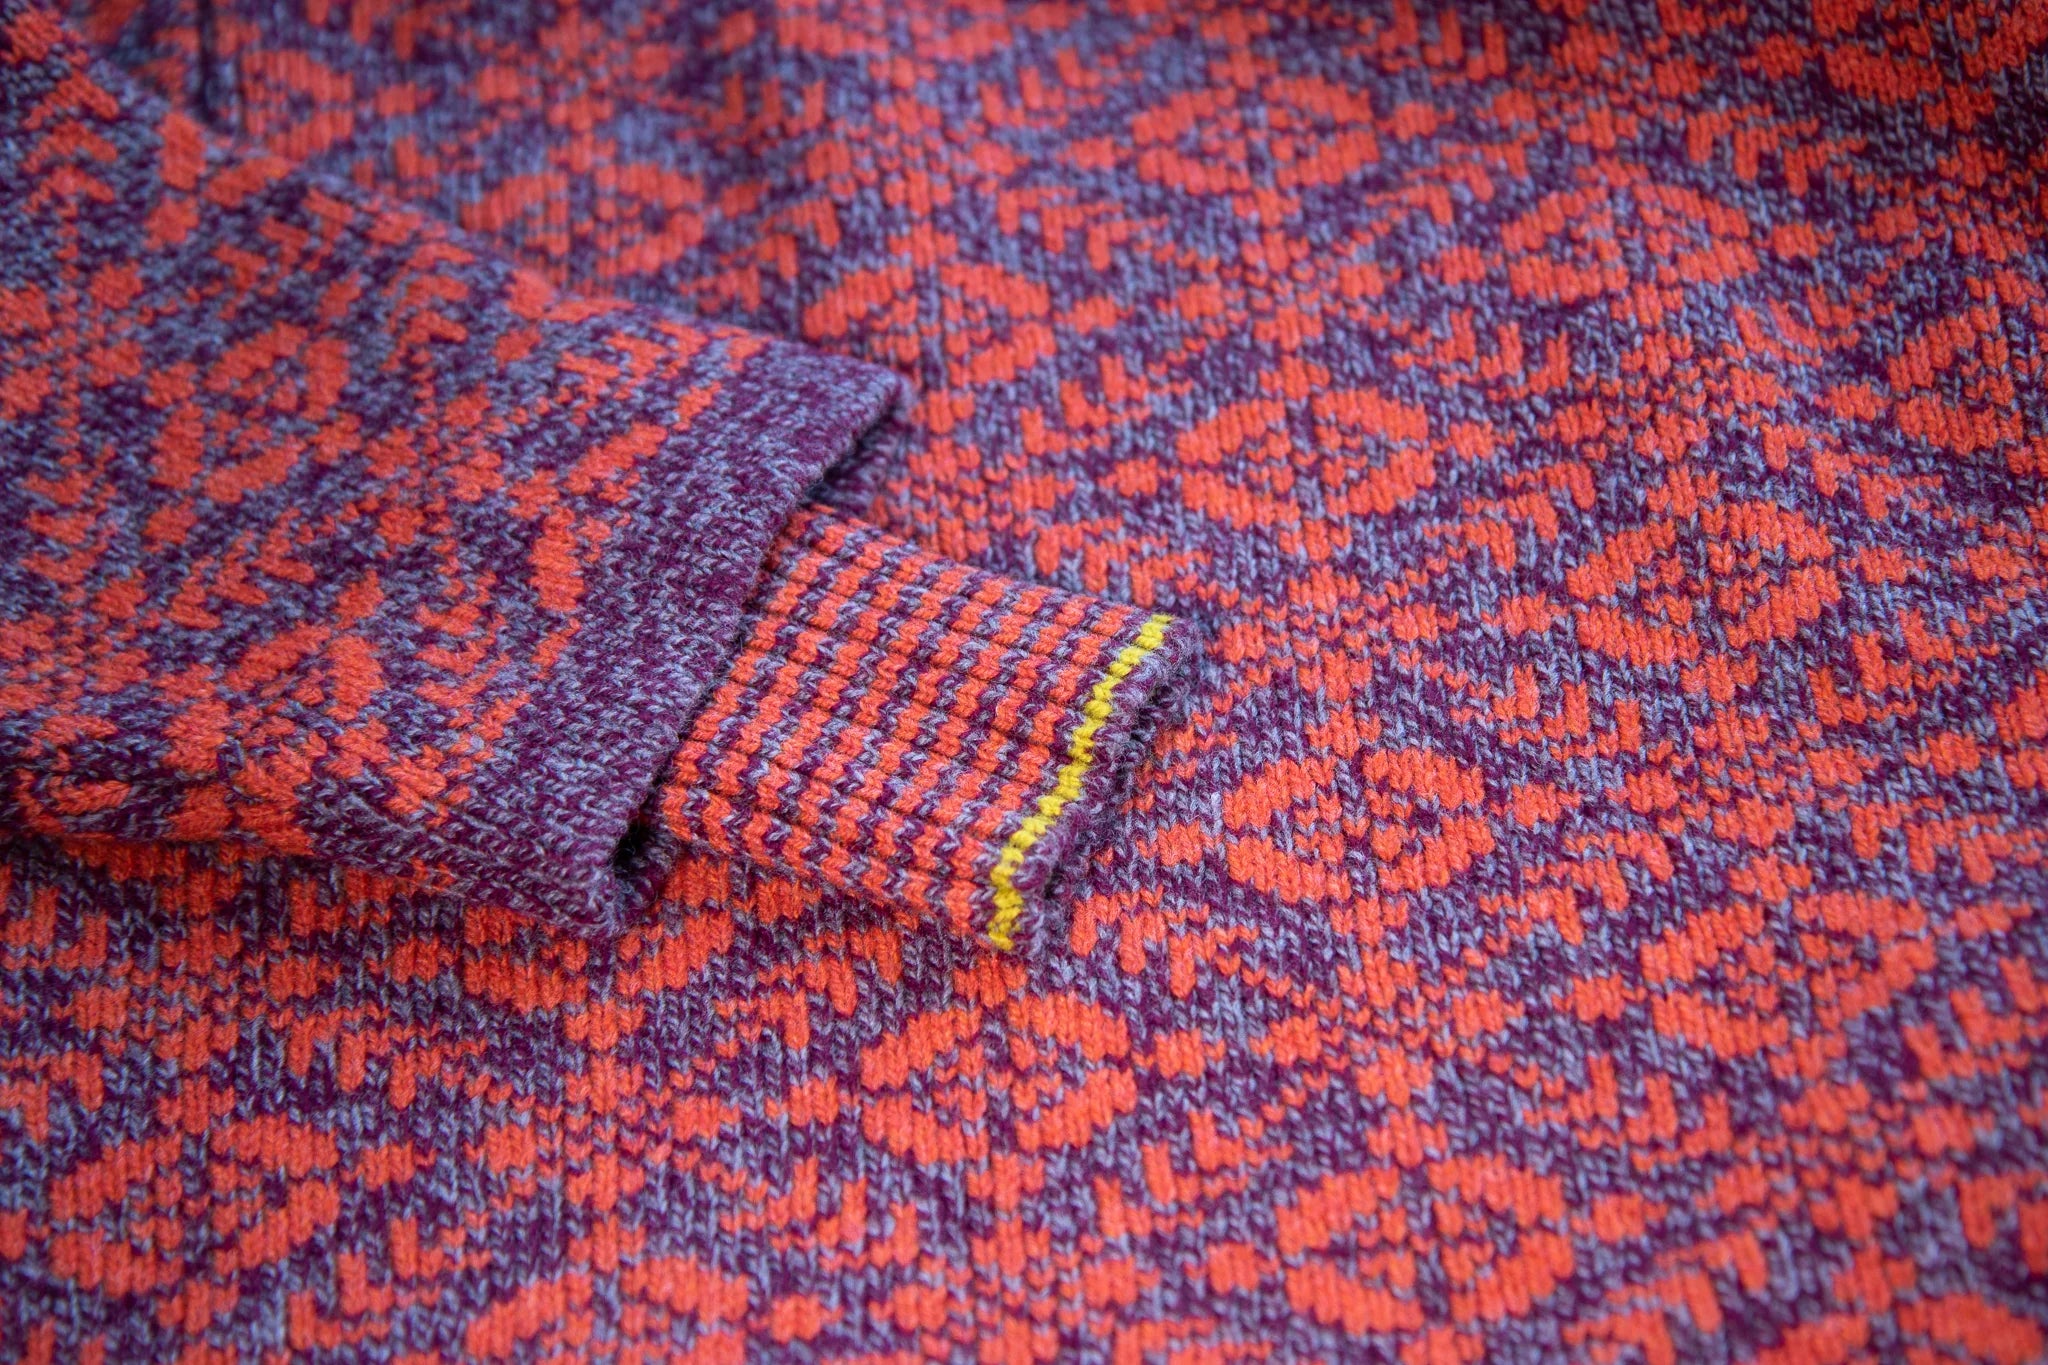 Detail of fair isle style smookie jumper with purple and pink. The cuff is inset and is striped with a yellow highlight.